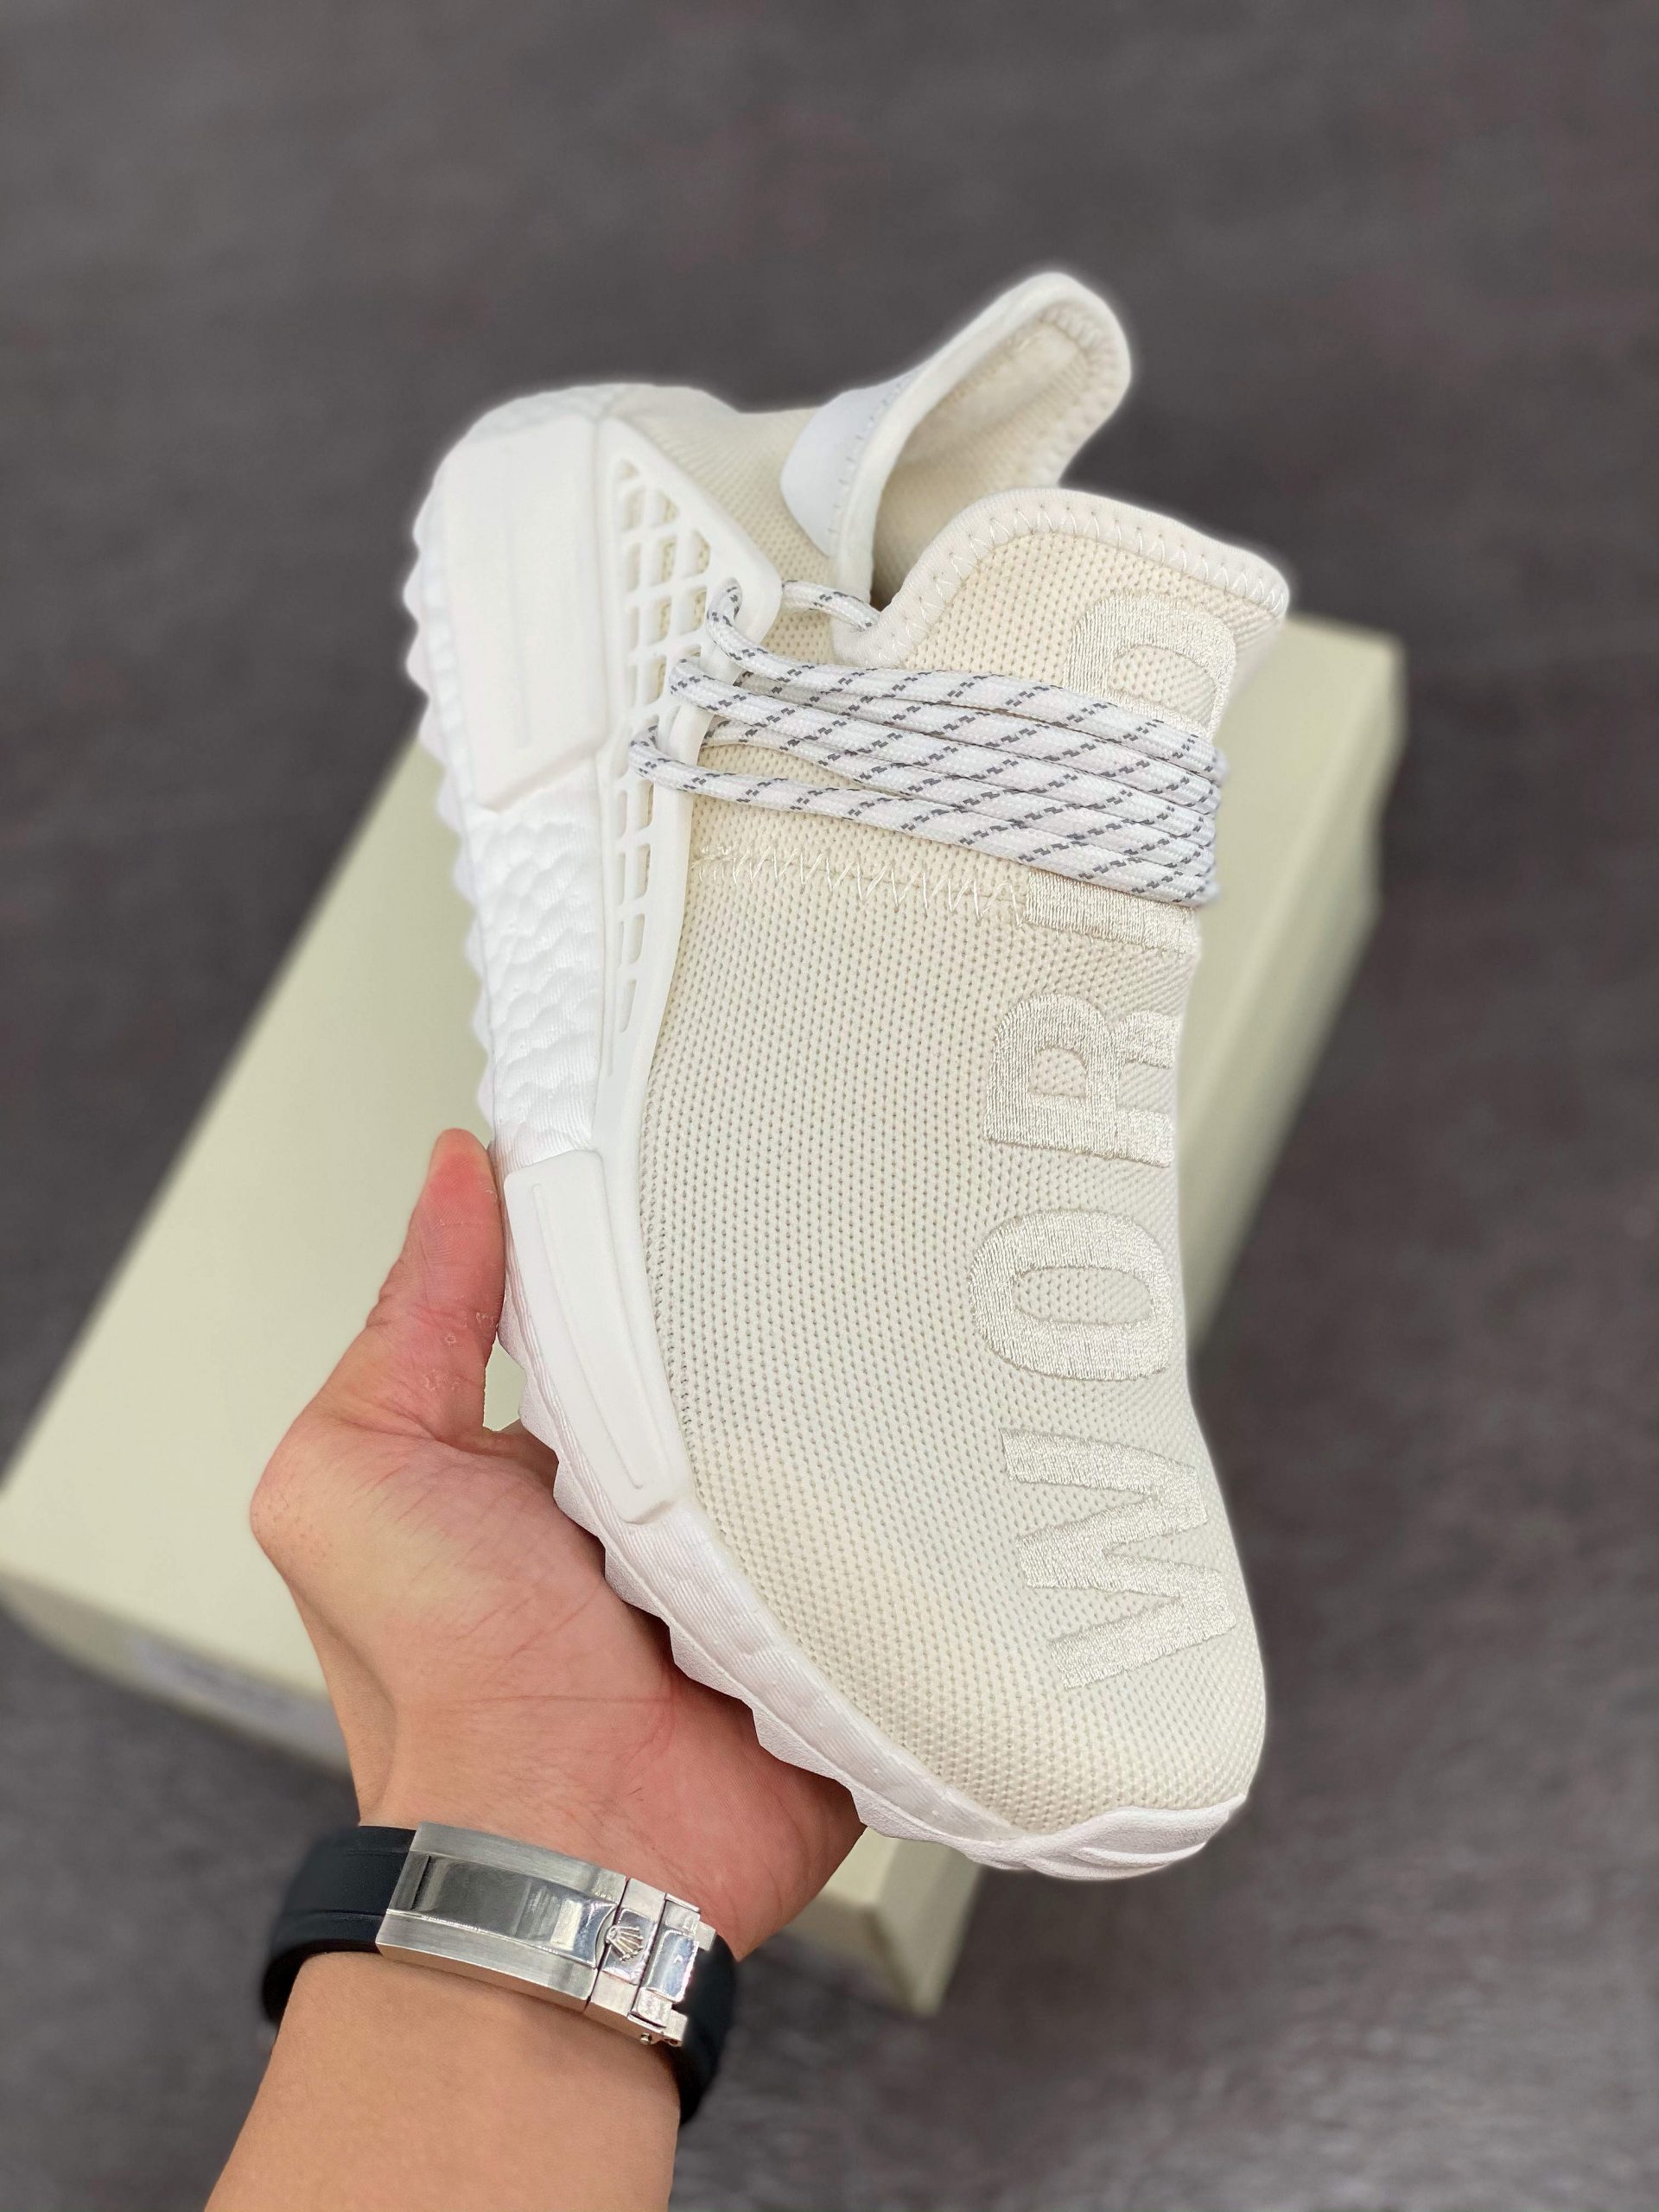 x adidas NMD “Blank Canvas” AC7031 For Sale Sneaker Hello